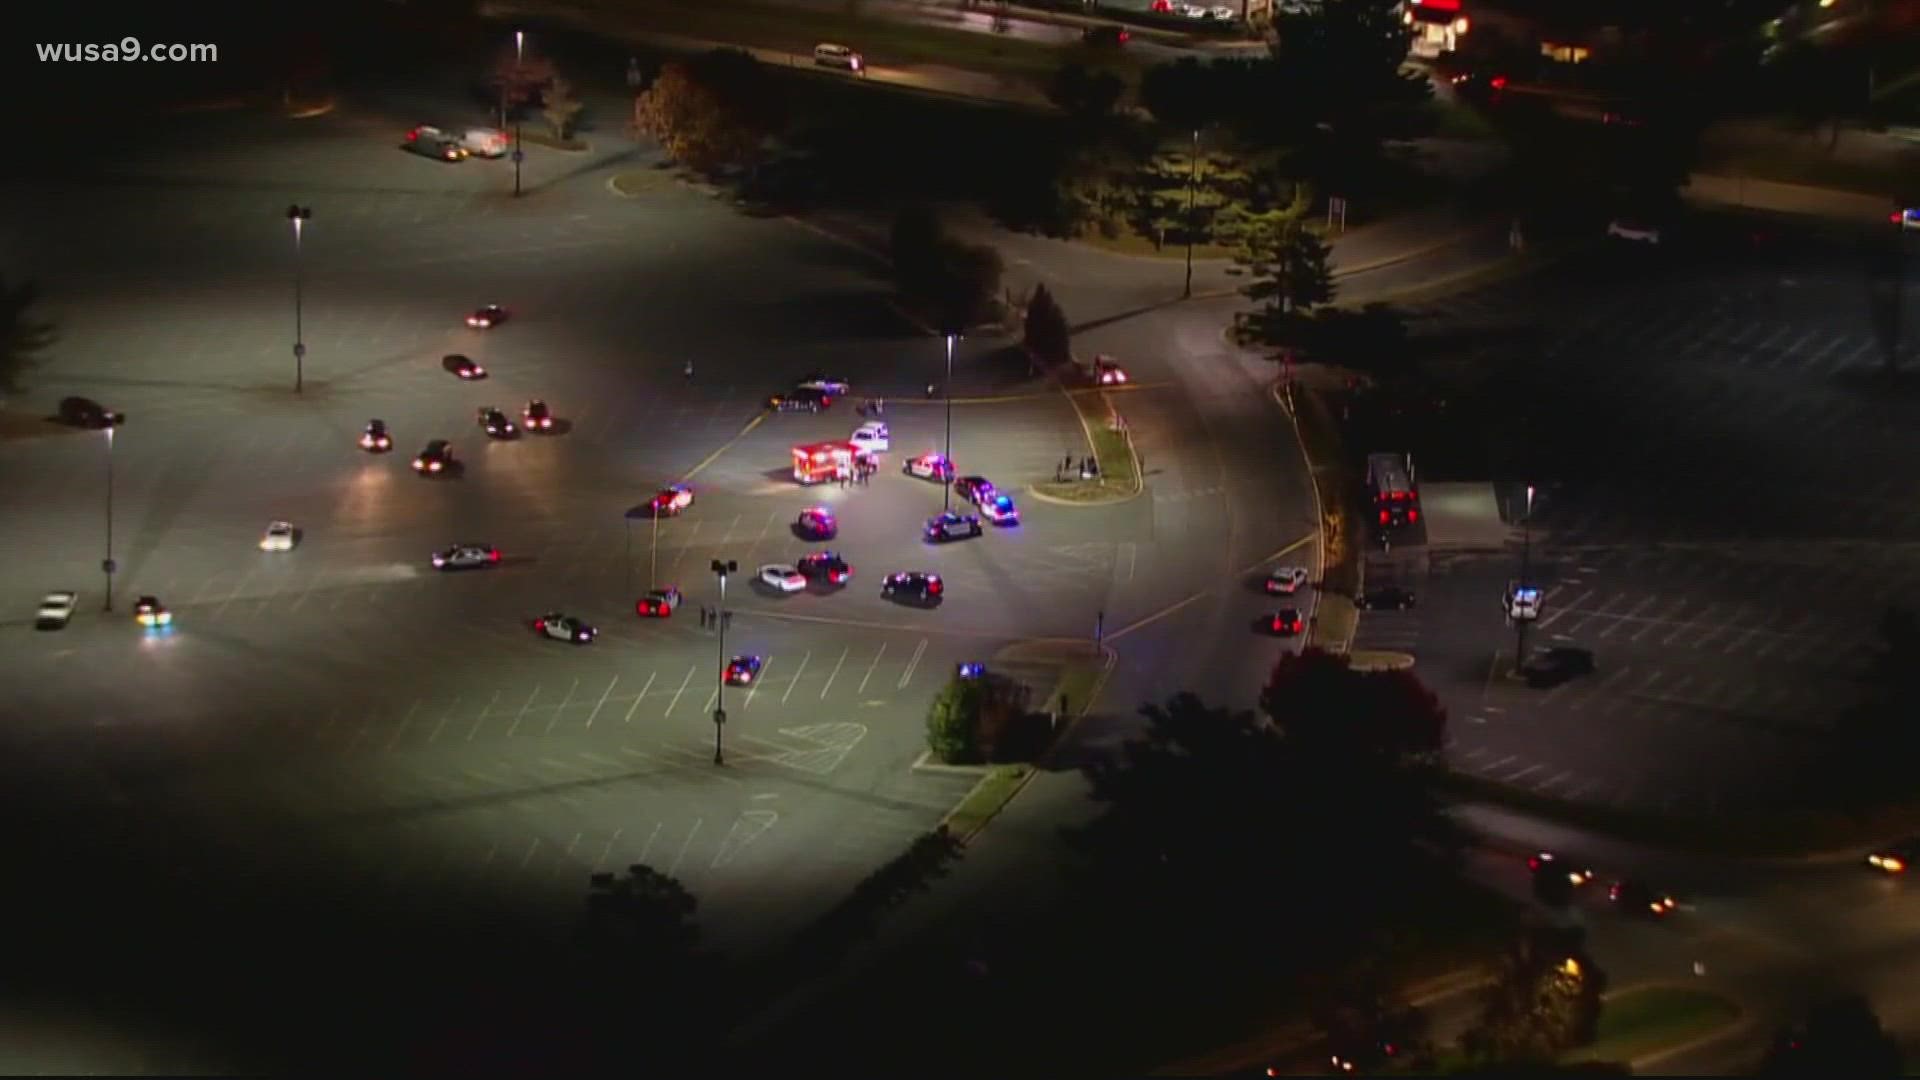 One man is dead after a deadly shooting in the parking lot of Lakeforest Mall, police say.